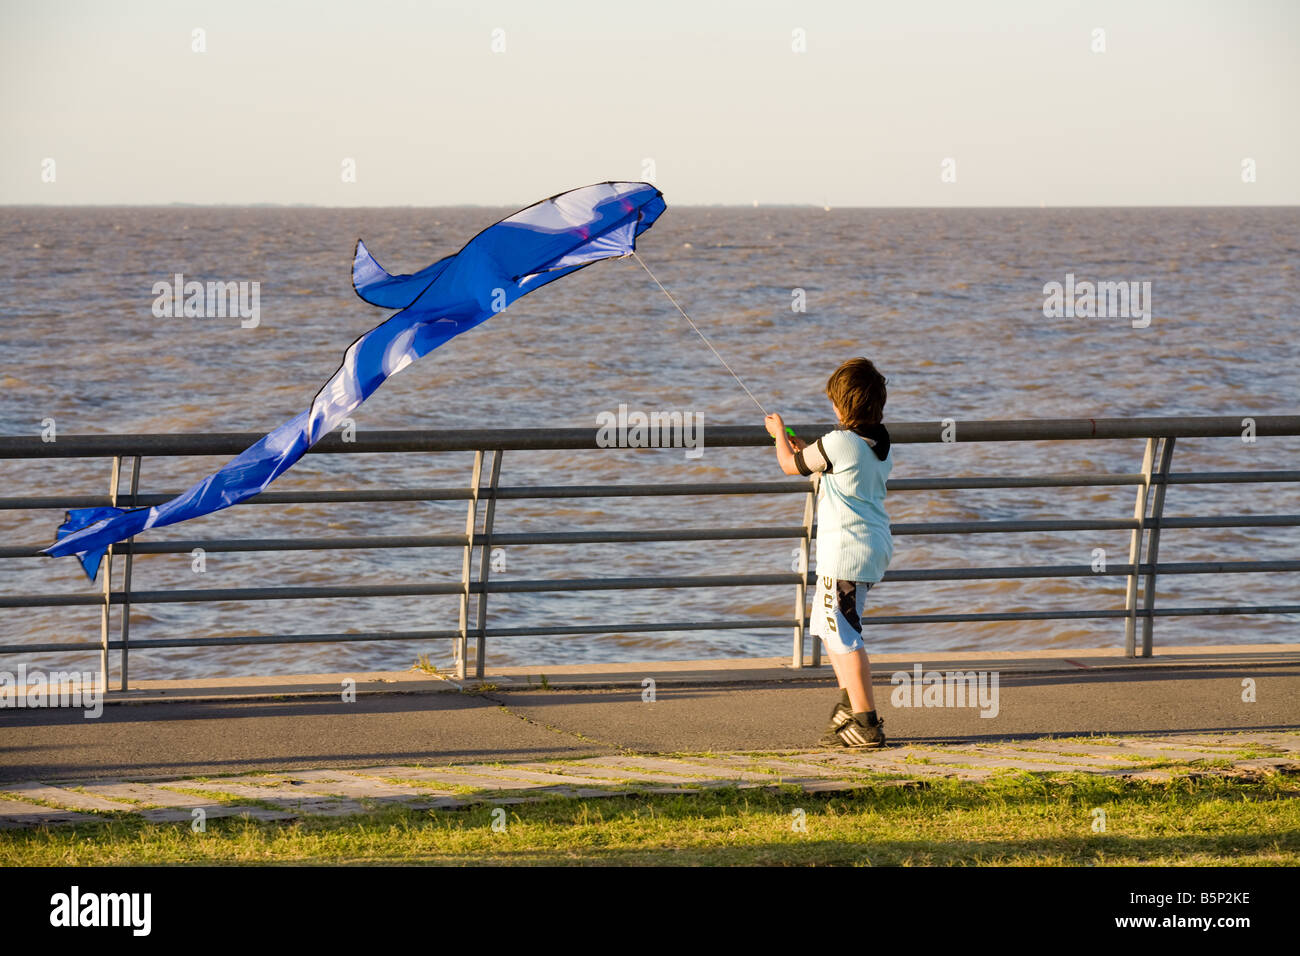 Child flying a blue kite Stock Photo